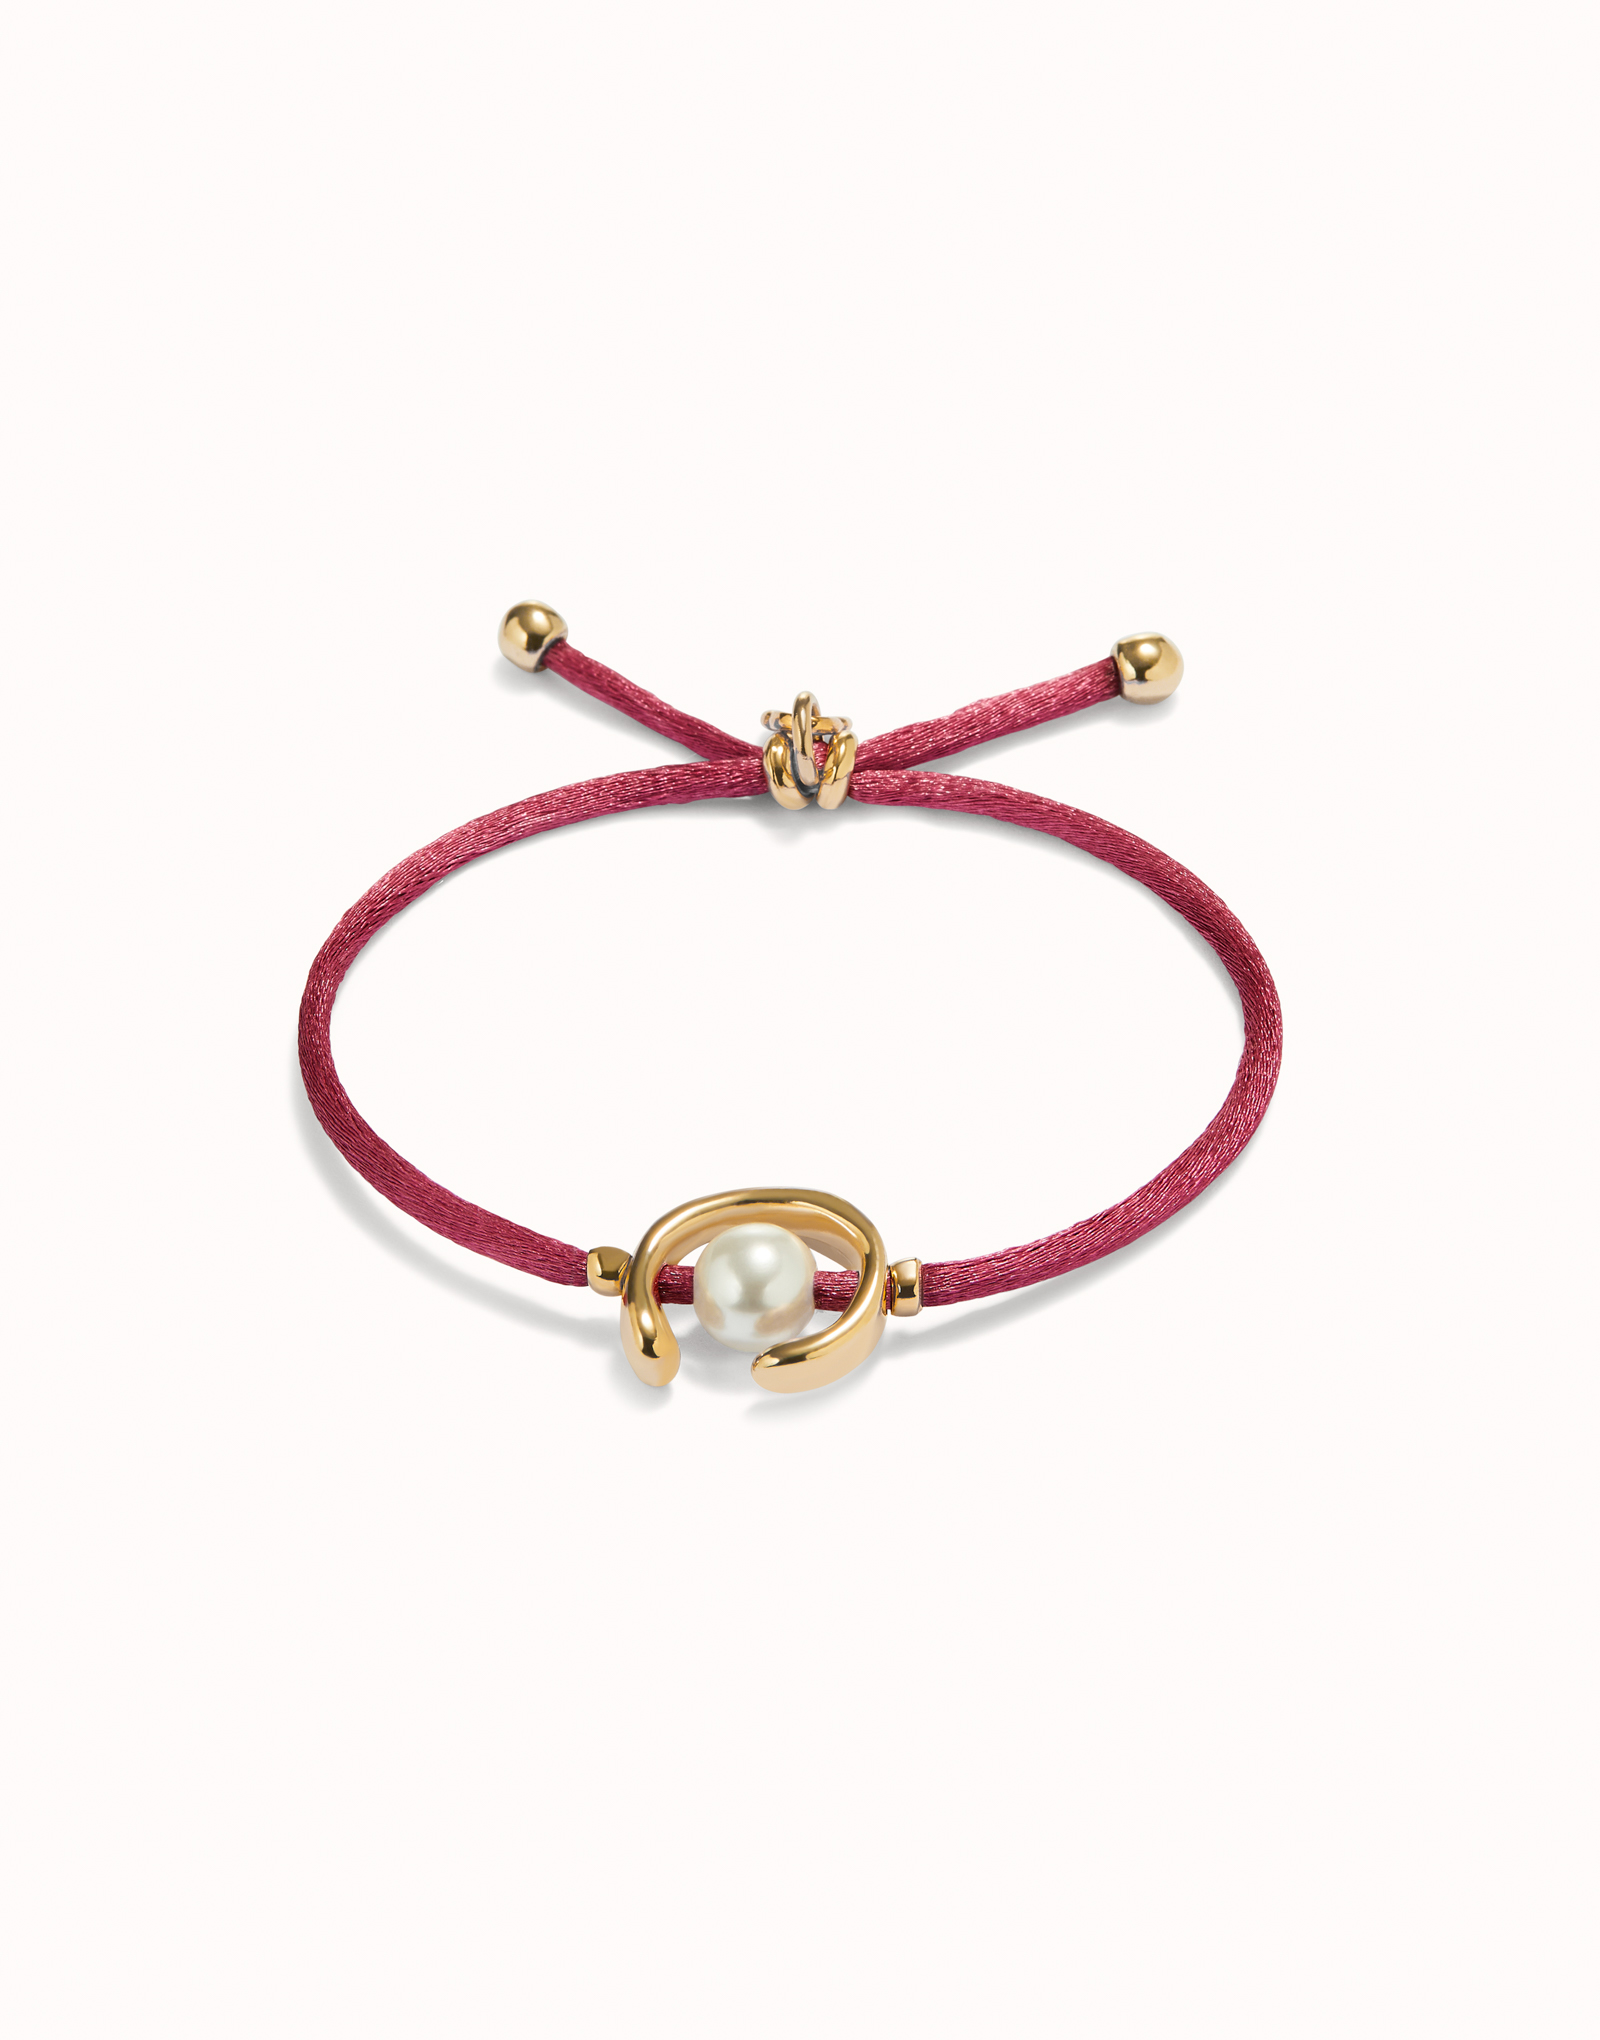 18K gold-plated mauve thread bracelet with shell pearl accessory., Golden, large image number null